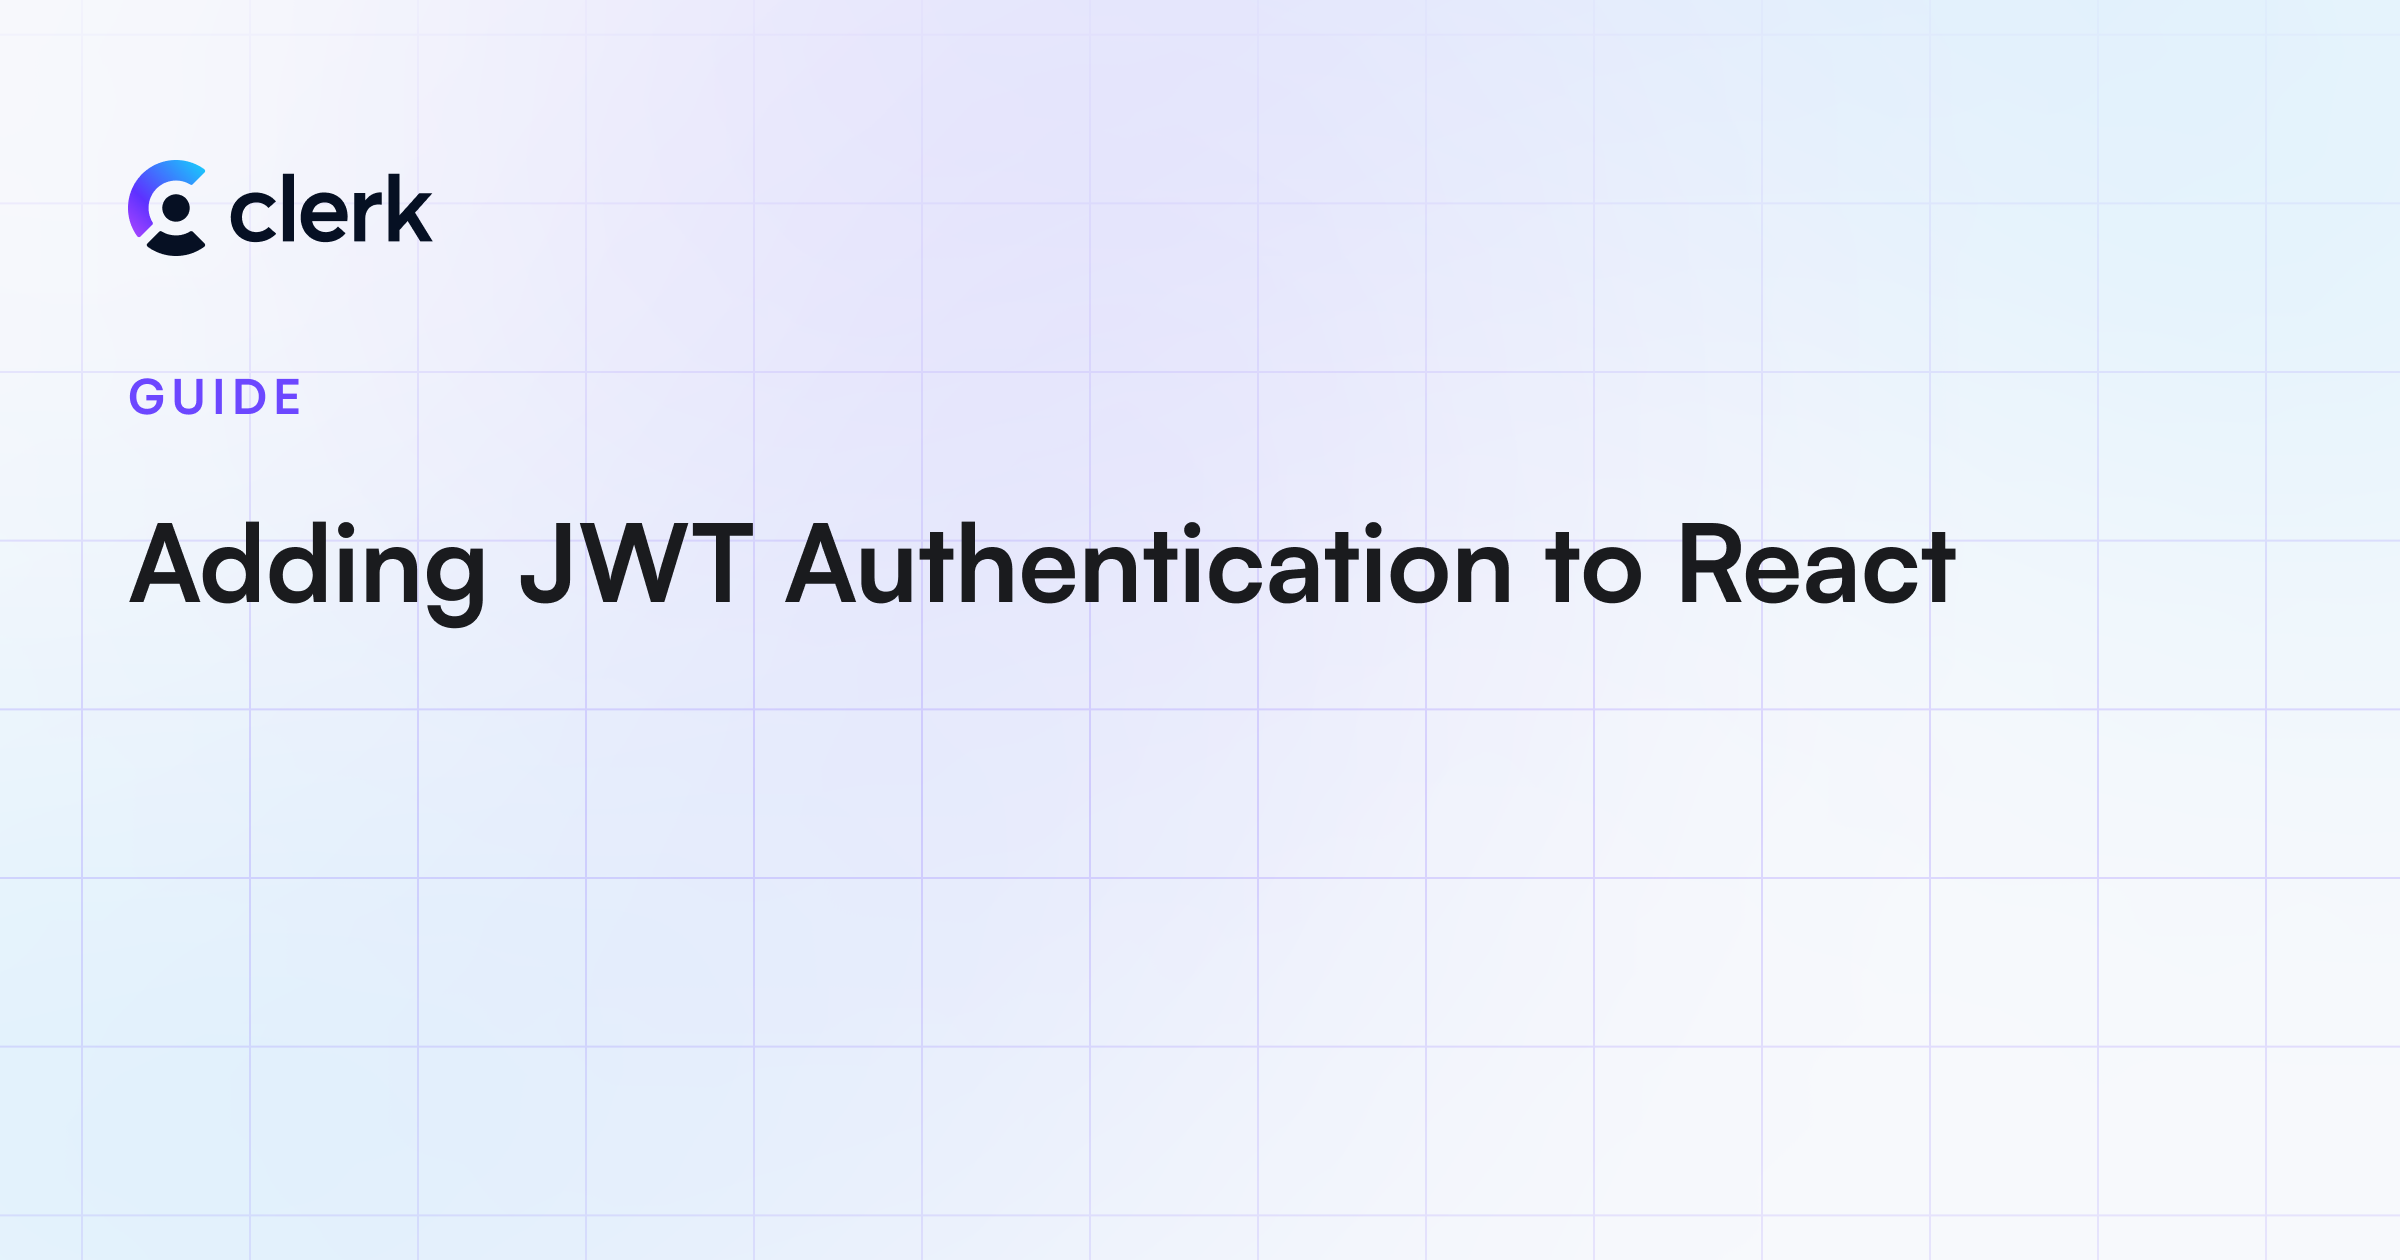 Adding JWT Authentication to React